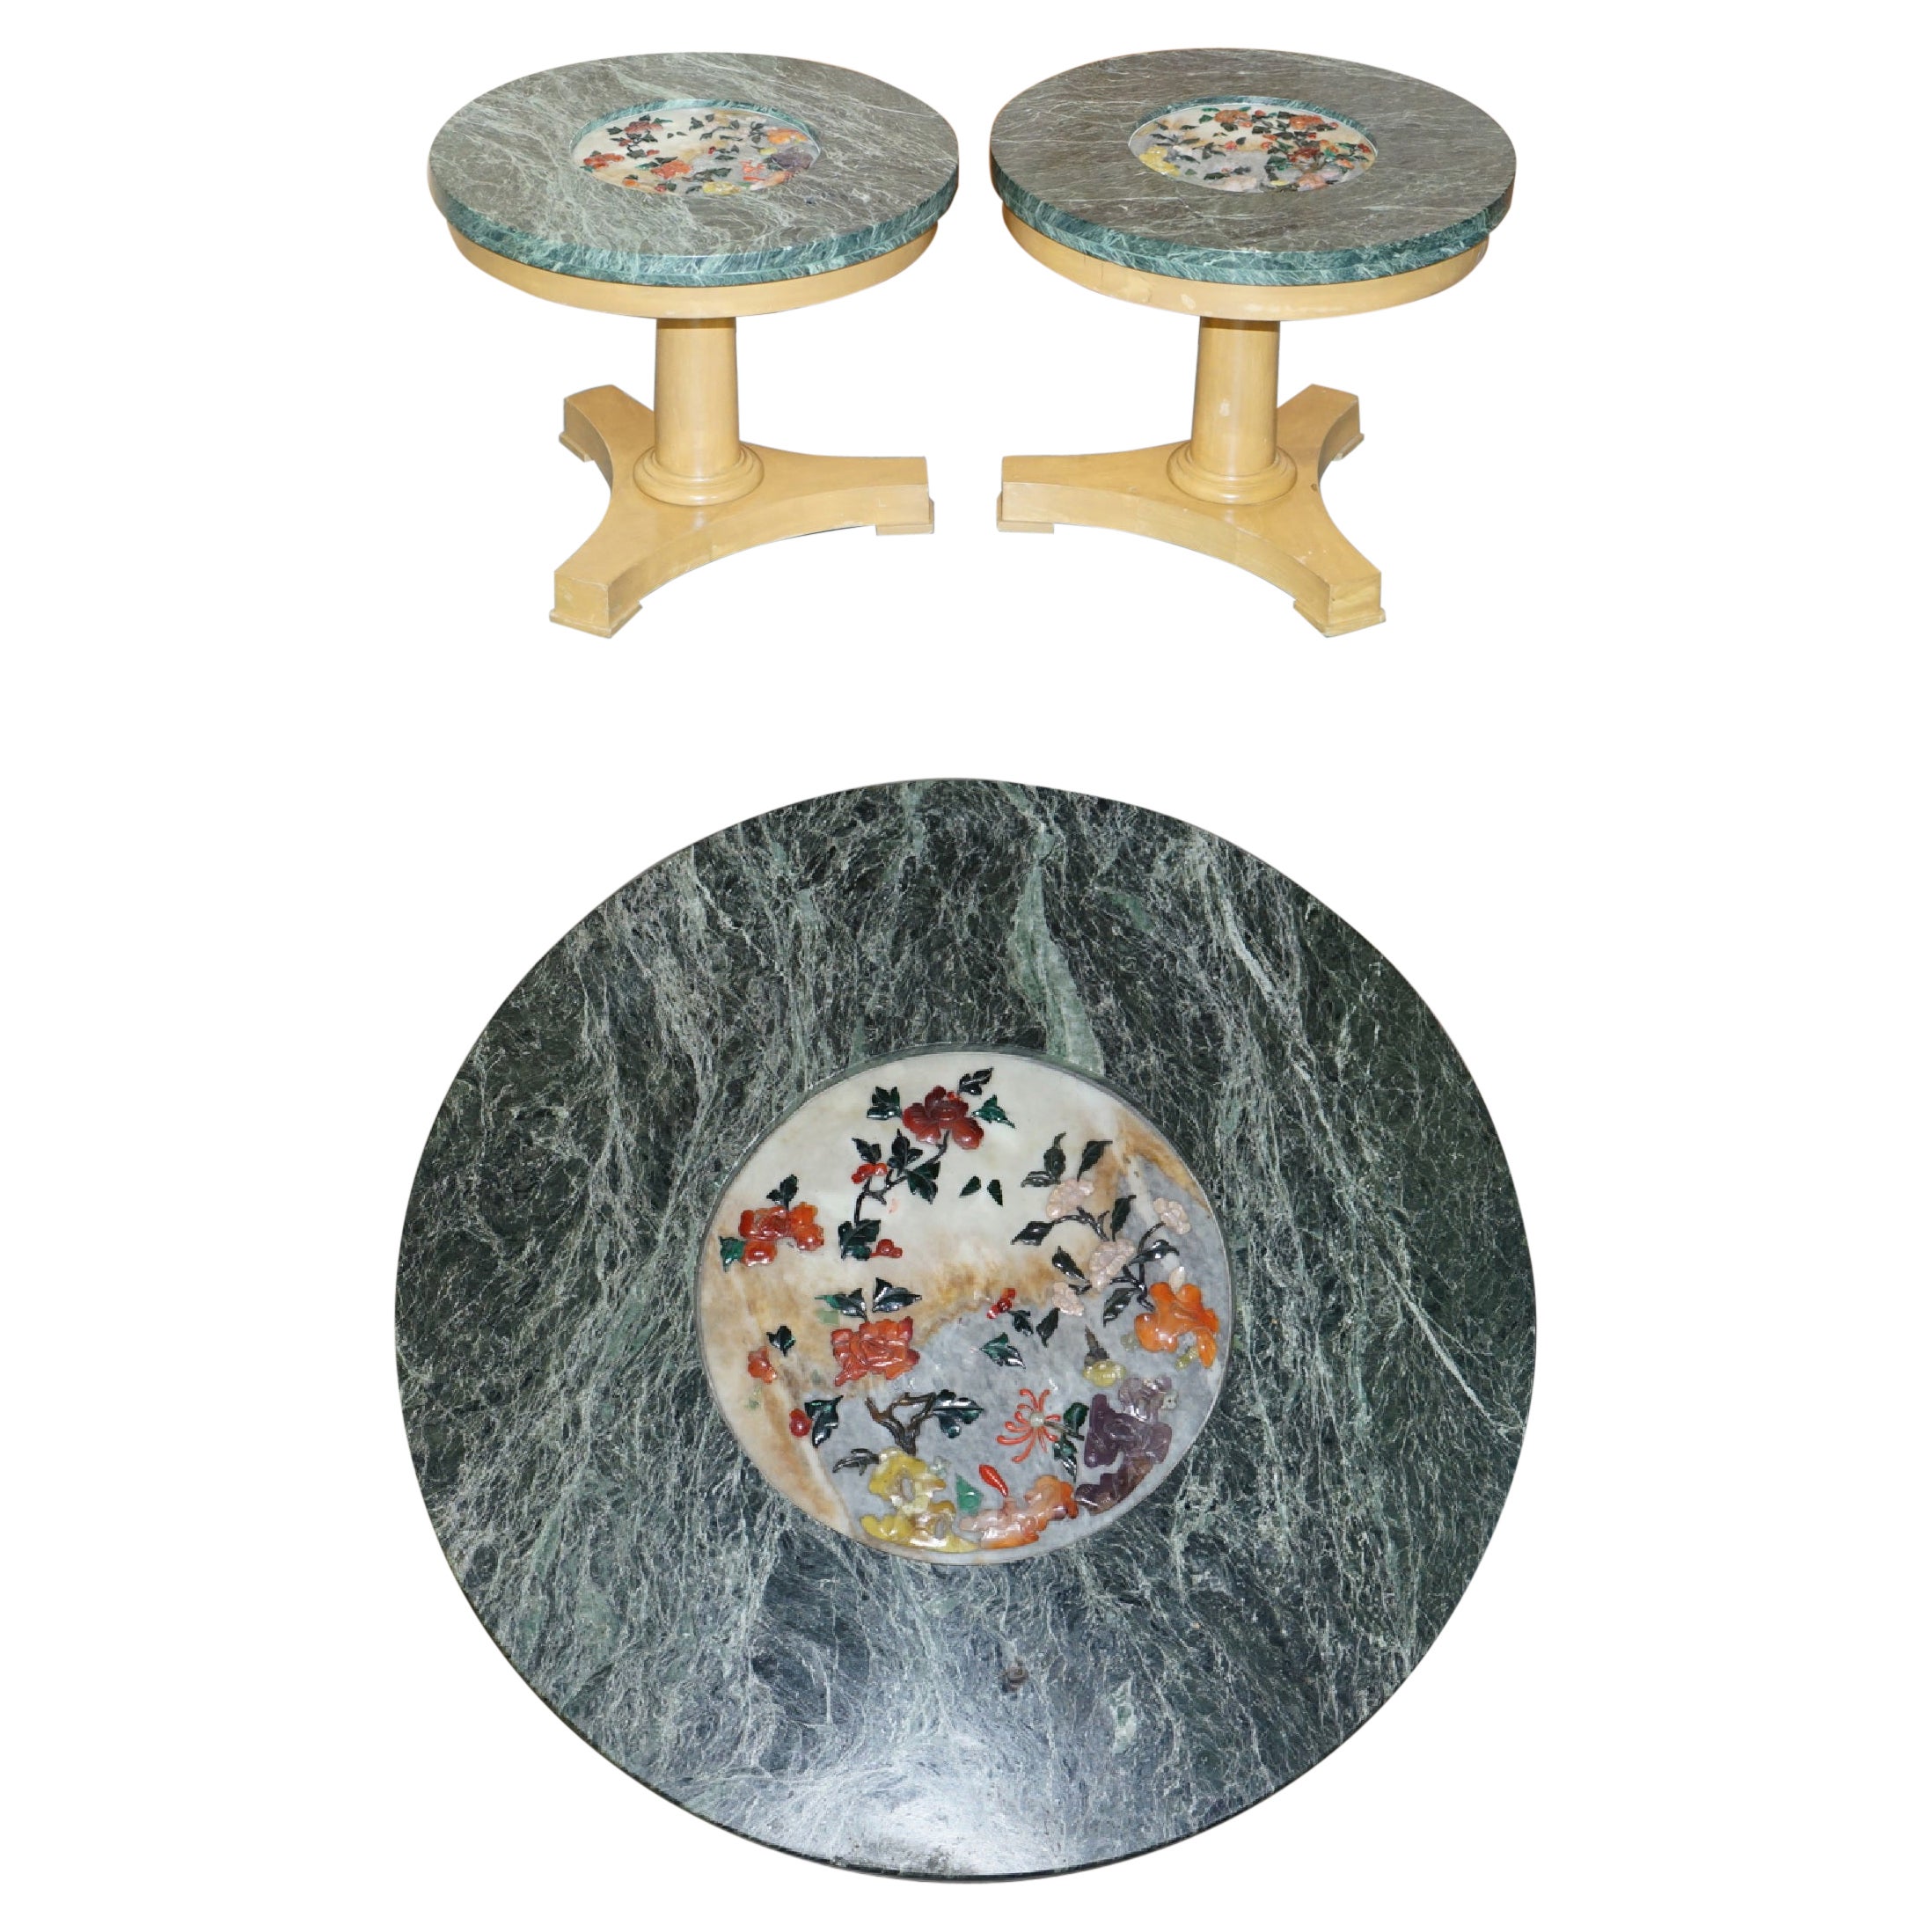 Pair of Walnut Side Tables with Green Marble Tops Inset with Hardstone Flowers